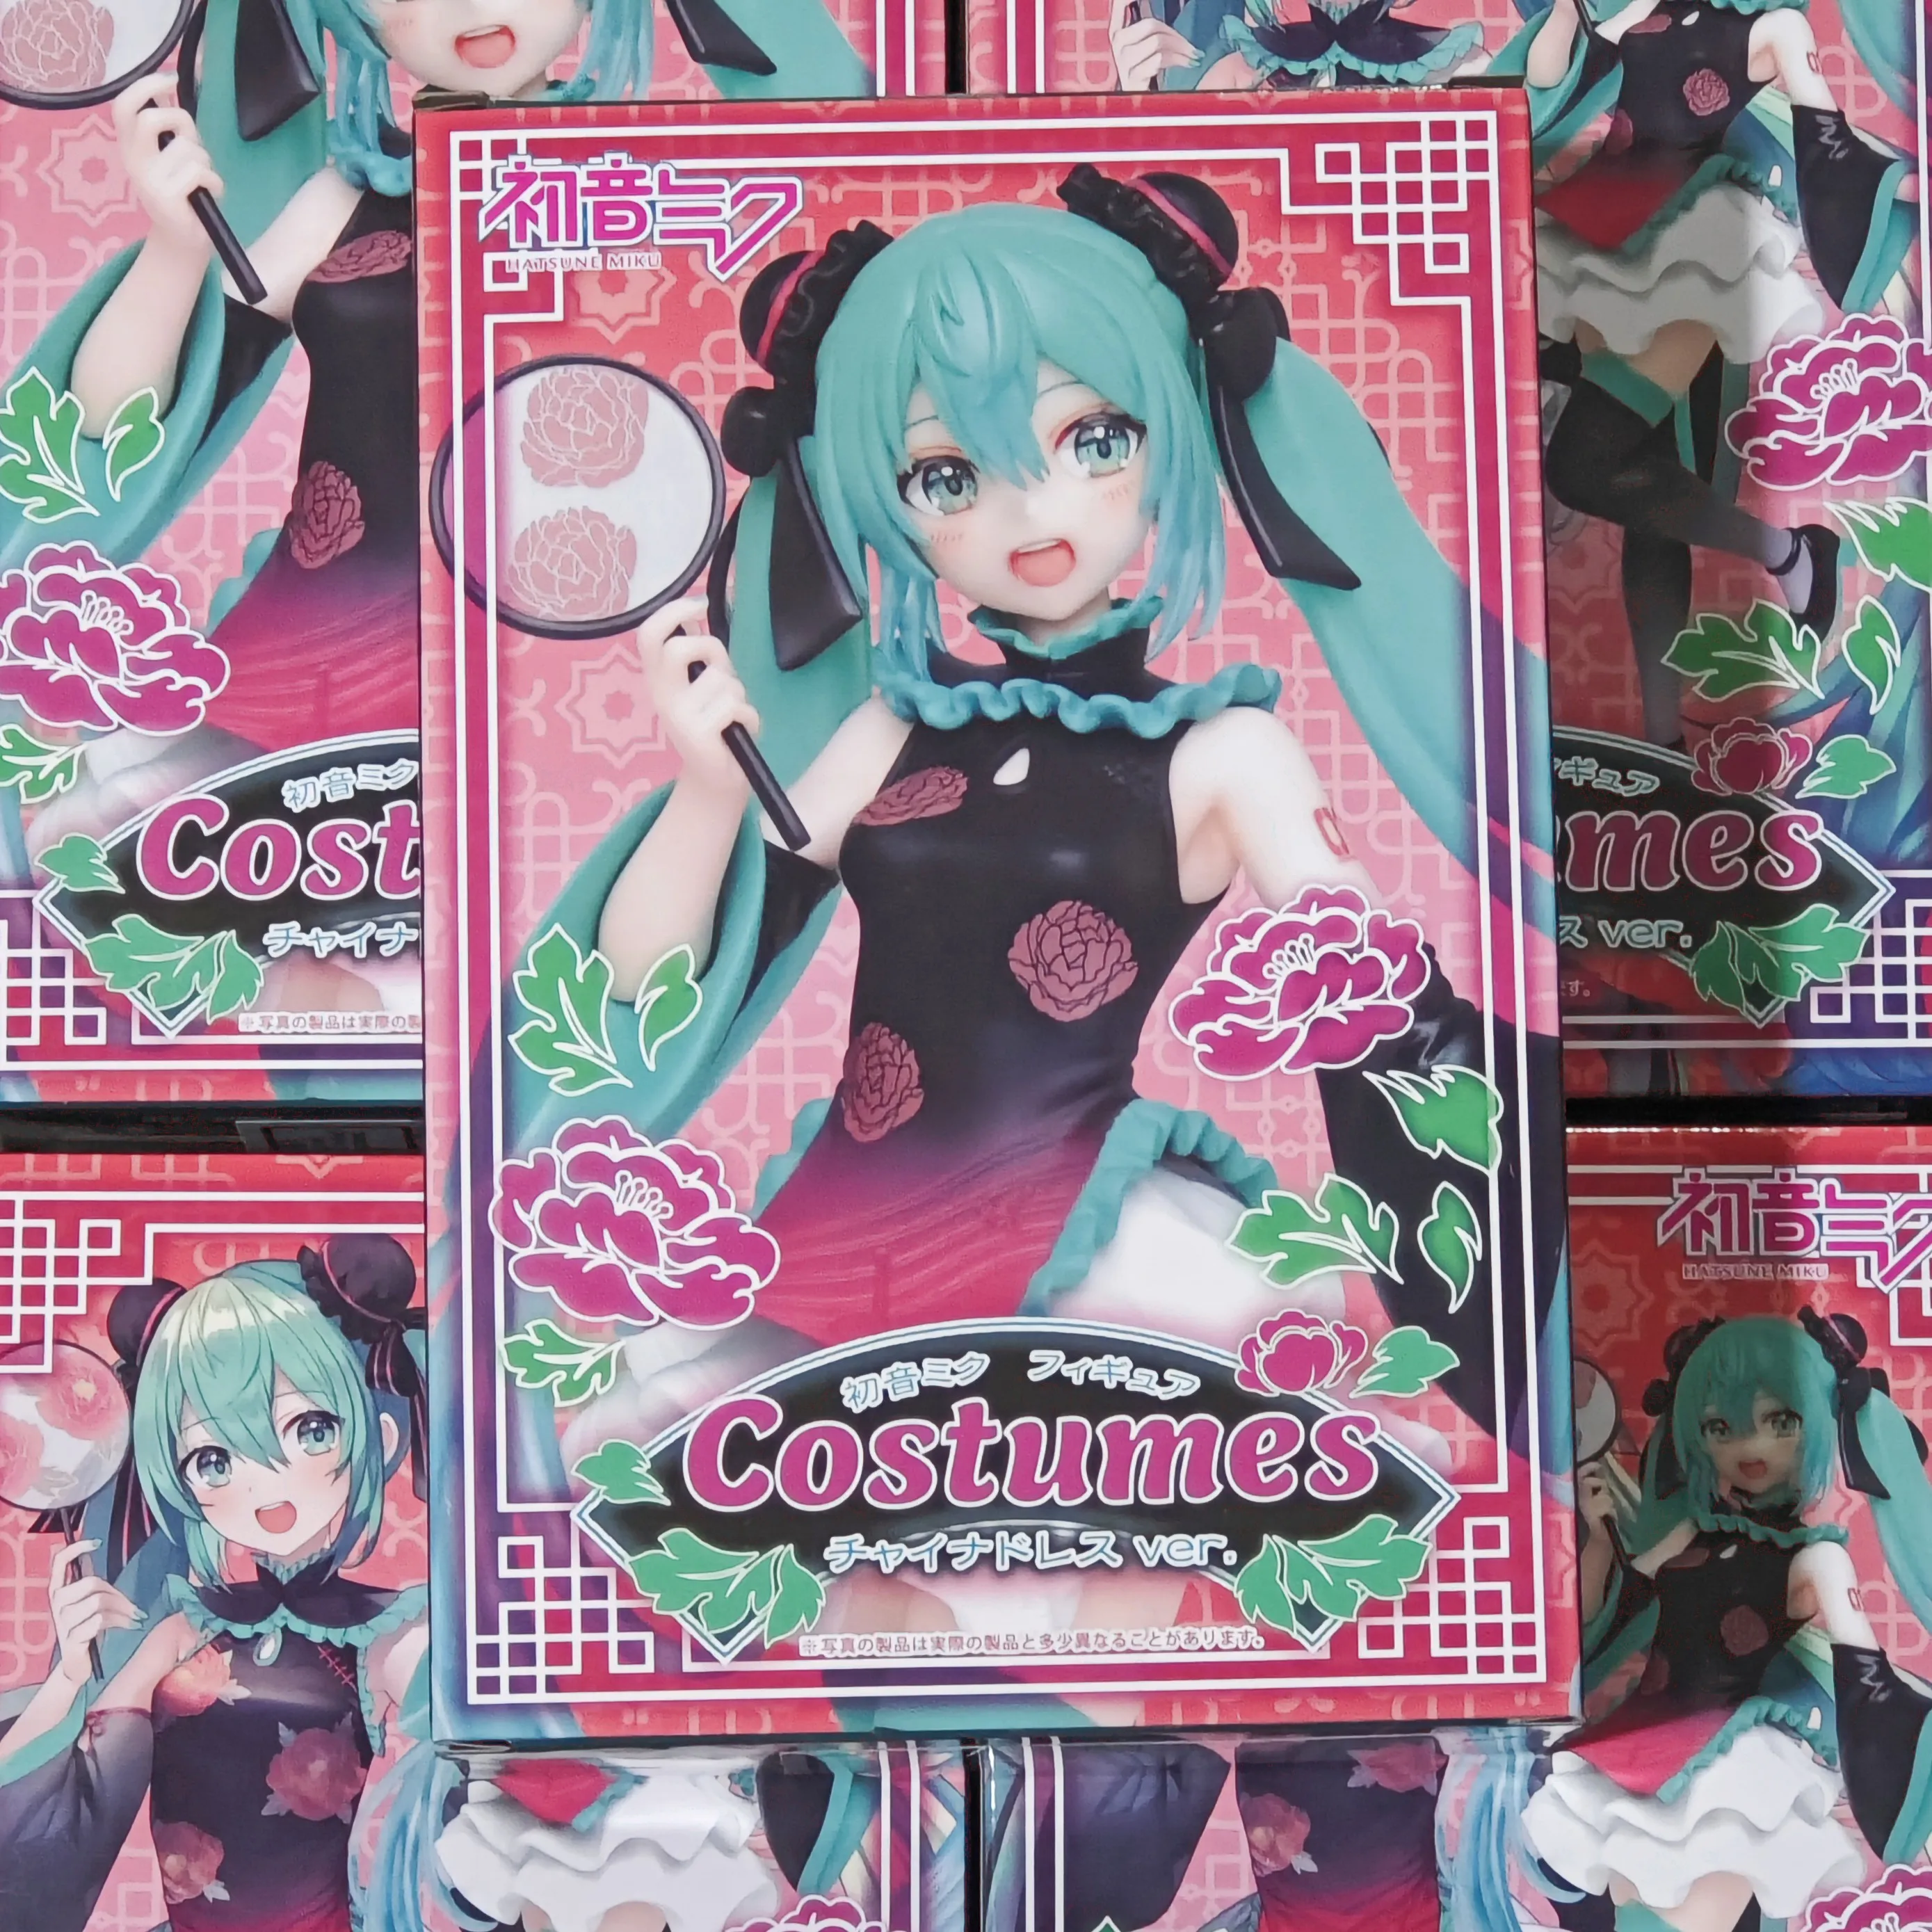 

In Stock 24 hours delivery Original Taito Hatsune Miku Action Anime Figure Costumes China Dress Ver. Cheongsam Boxed Model Gifts